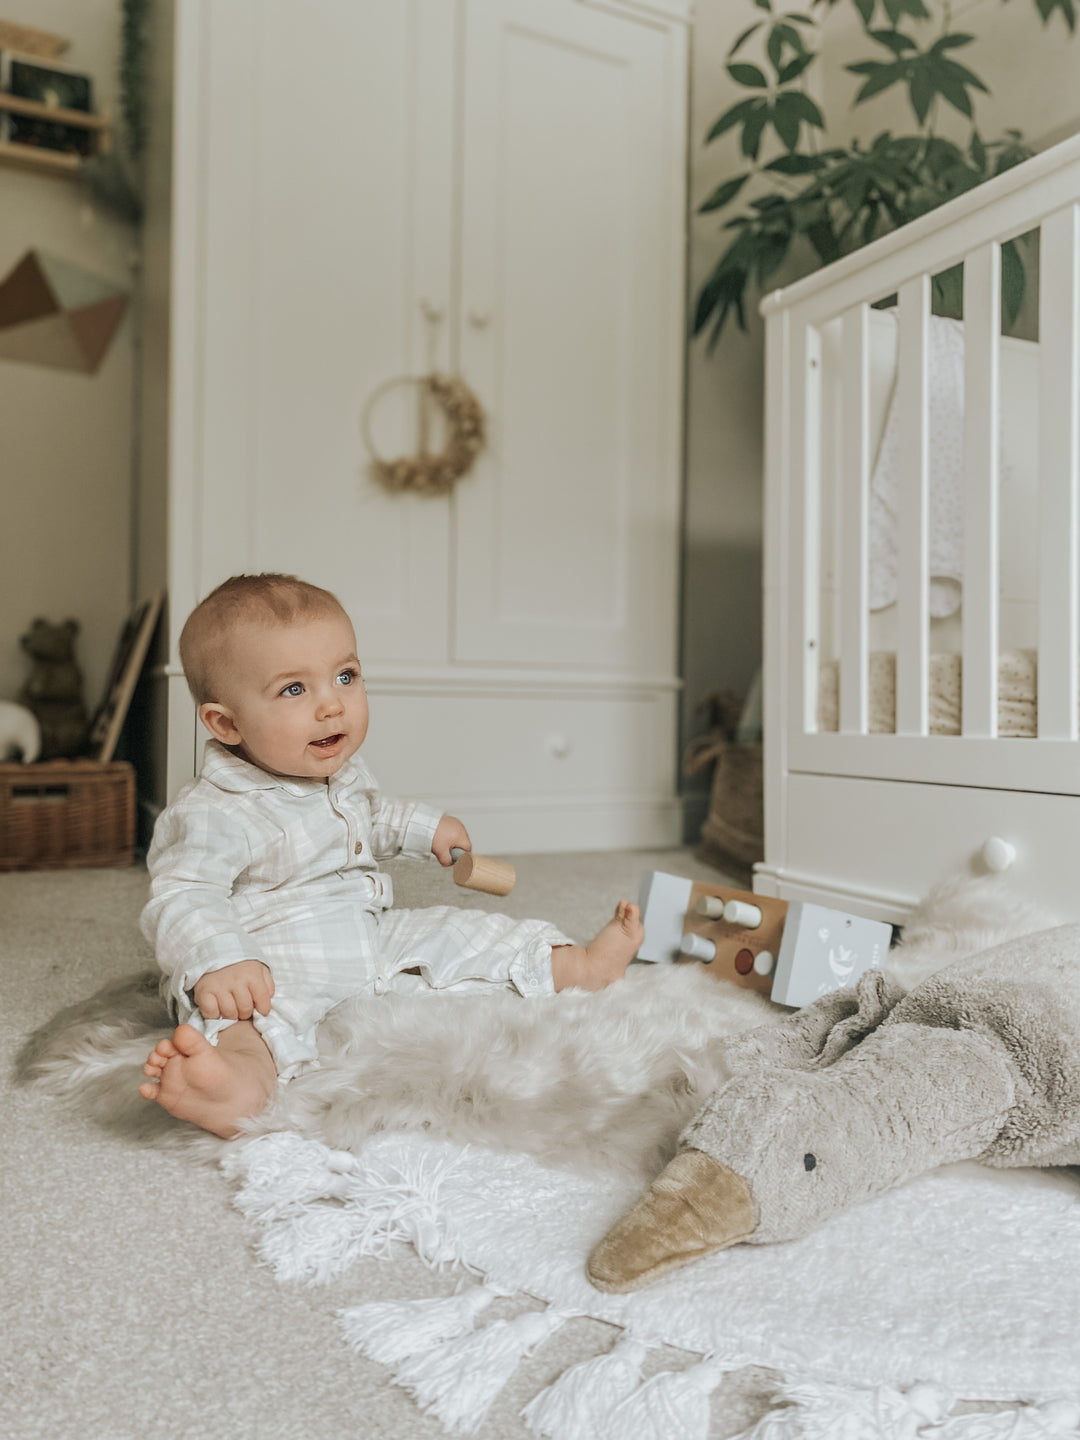 Are Sheepskin Rugs A Good Idea For Baby?